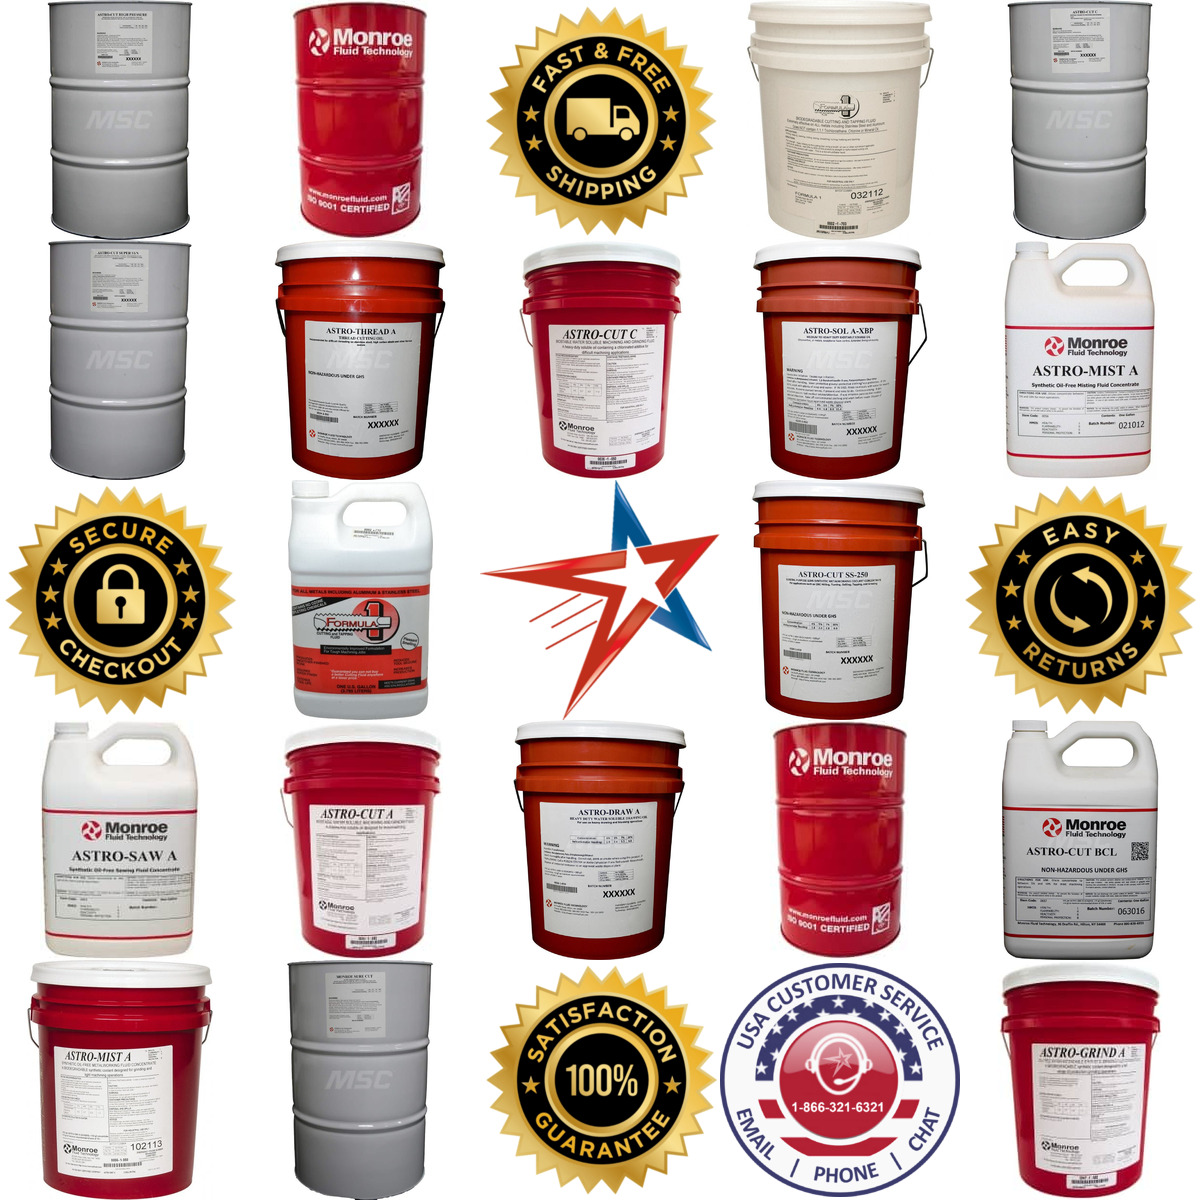 A selection of Monroe Fluid Technology products on GoVets